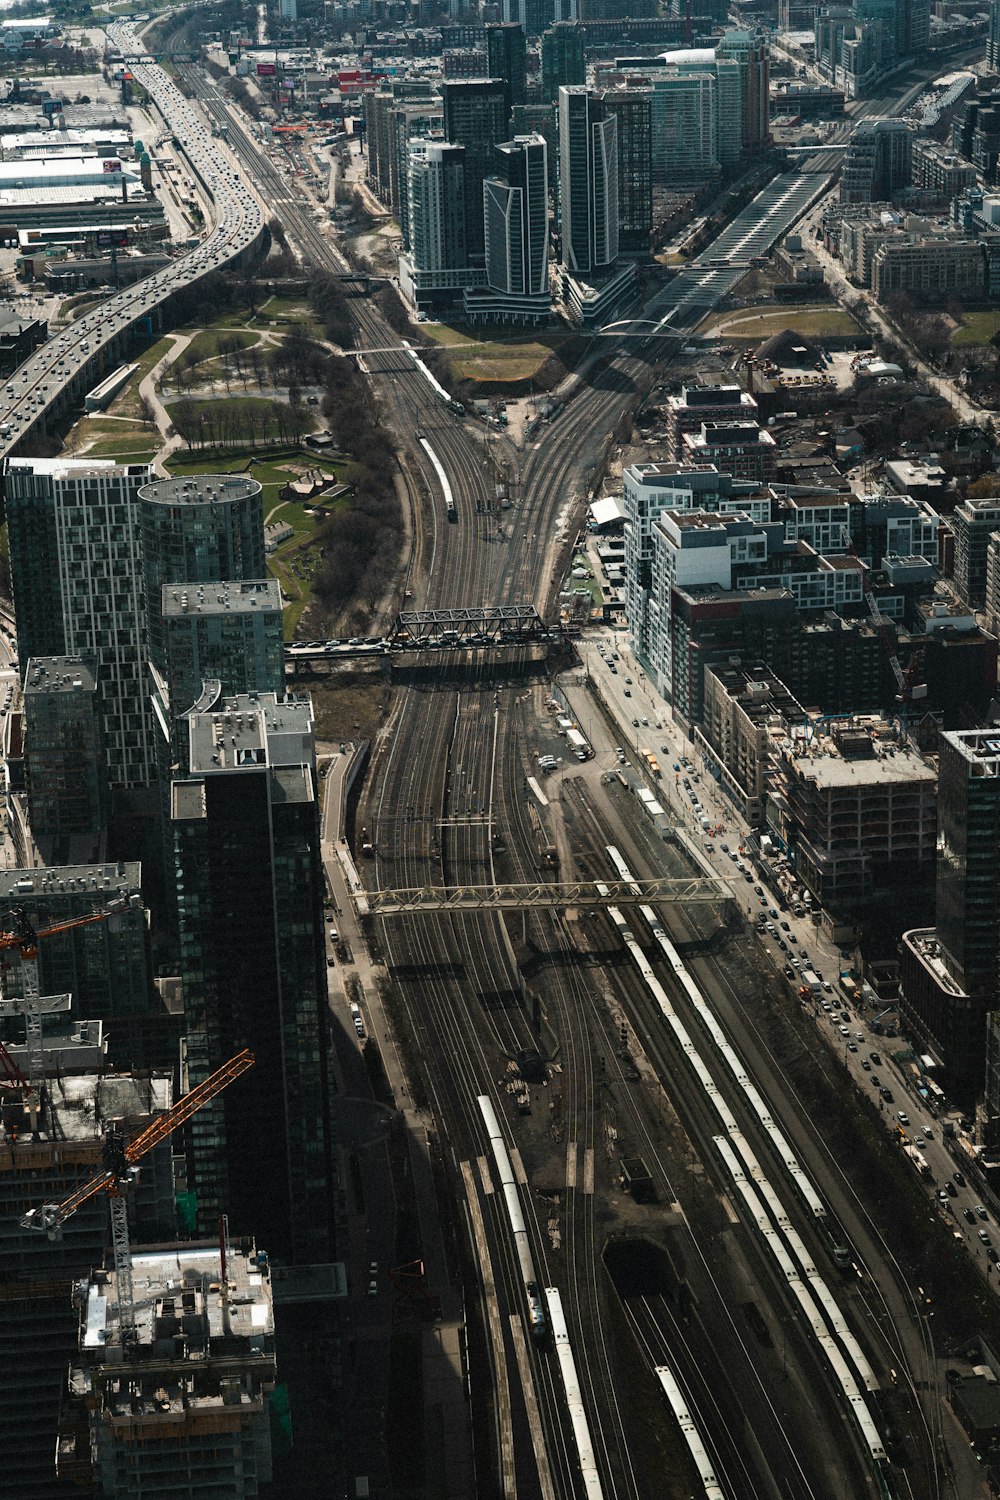 an aerial view of a city with train tracks